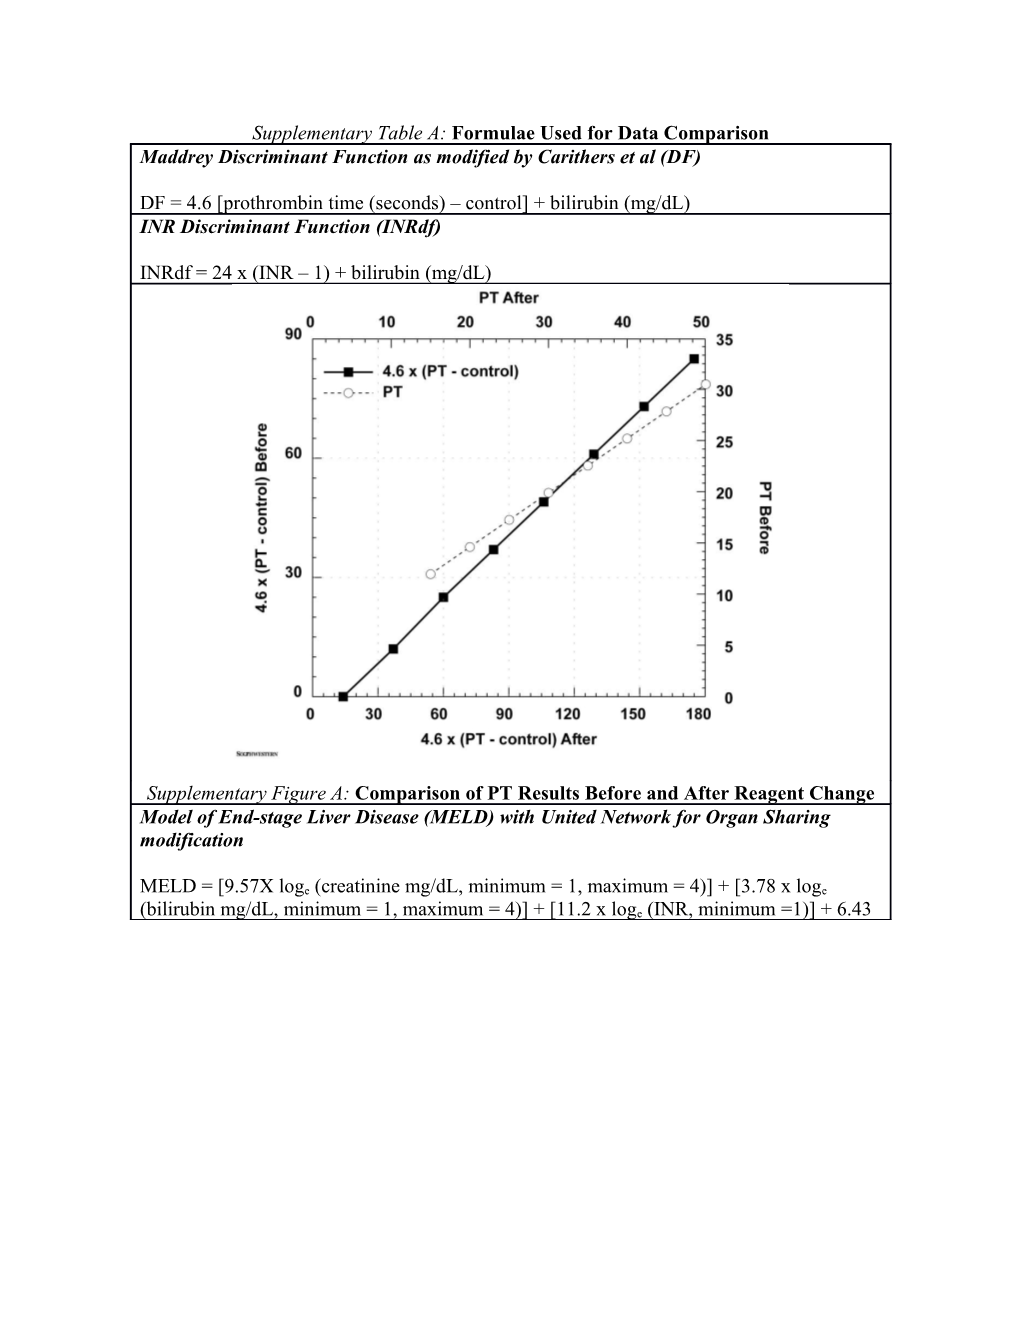 Supplementary Figure B: Correlation Between DF and MELD Measures of Severity on Admission